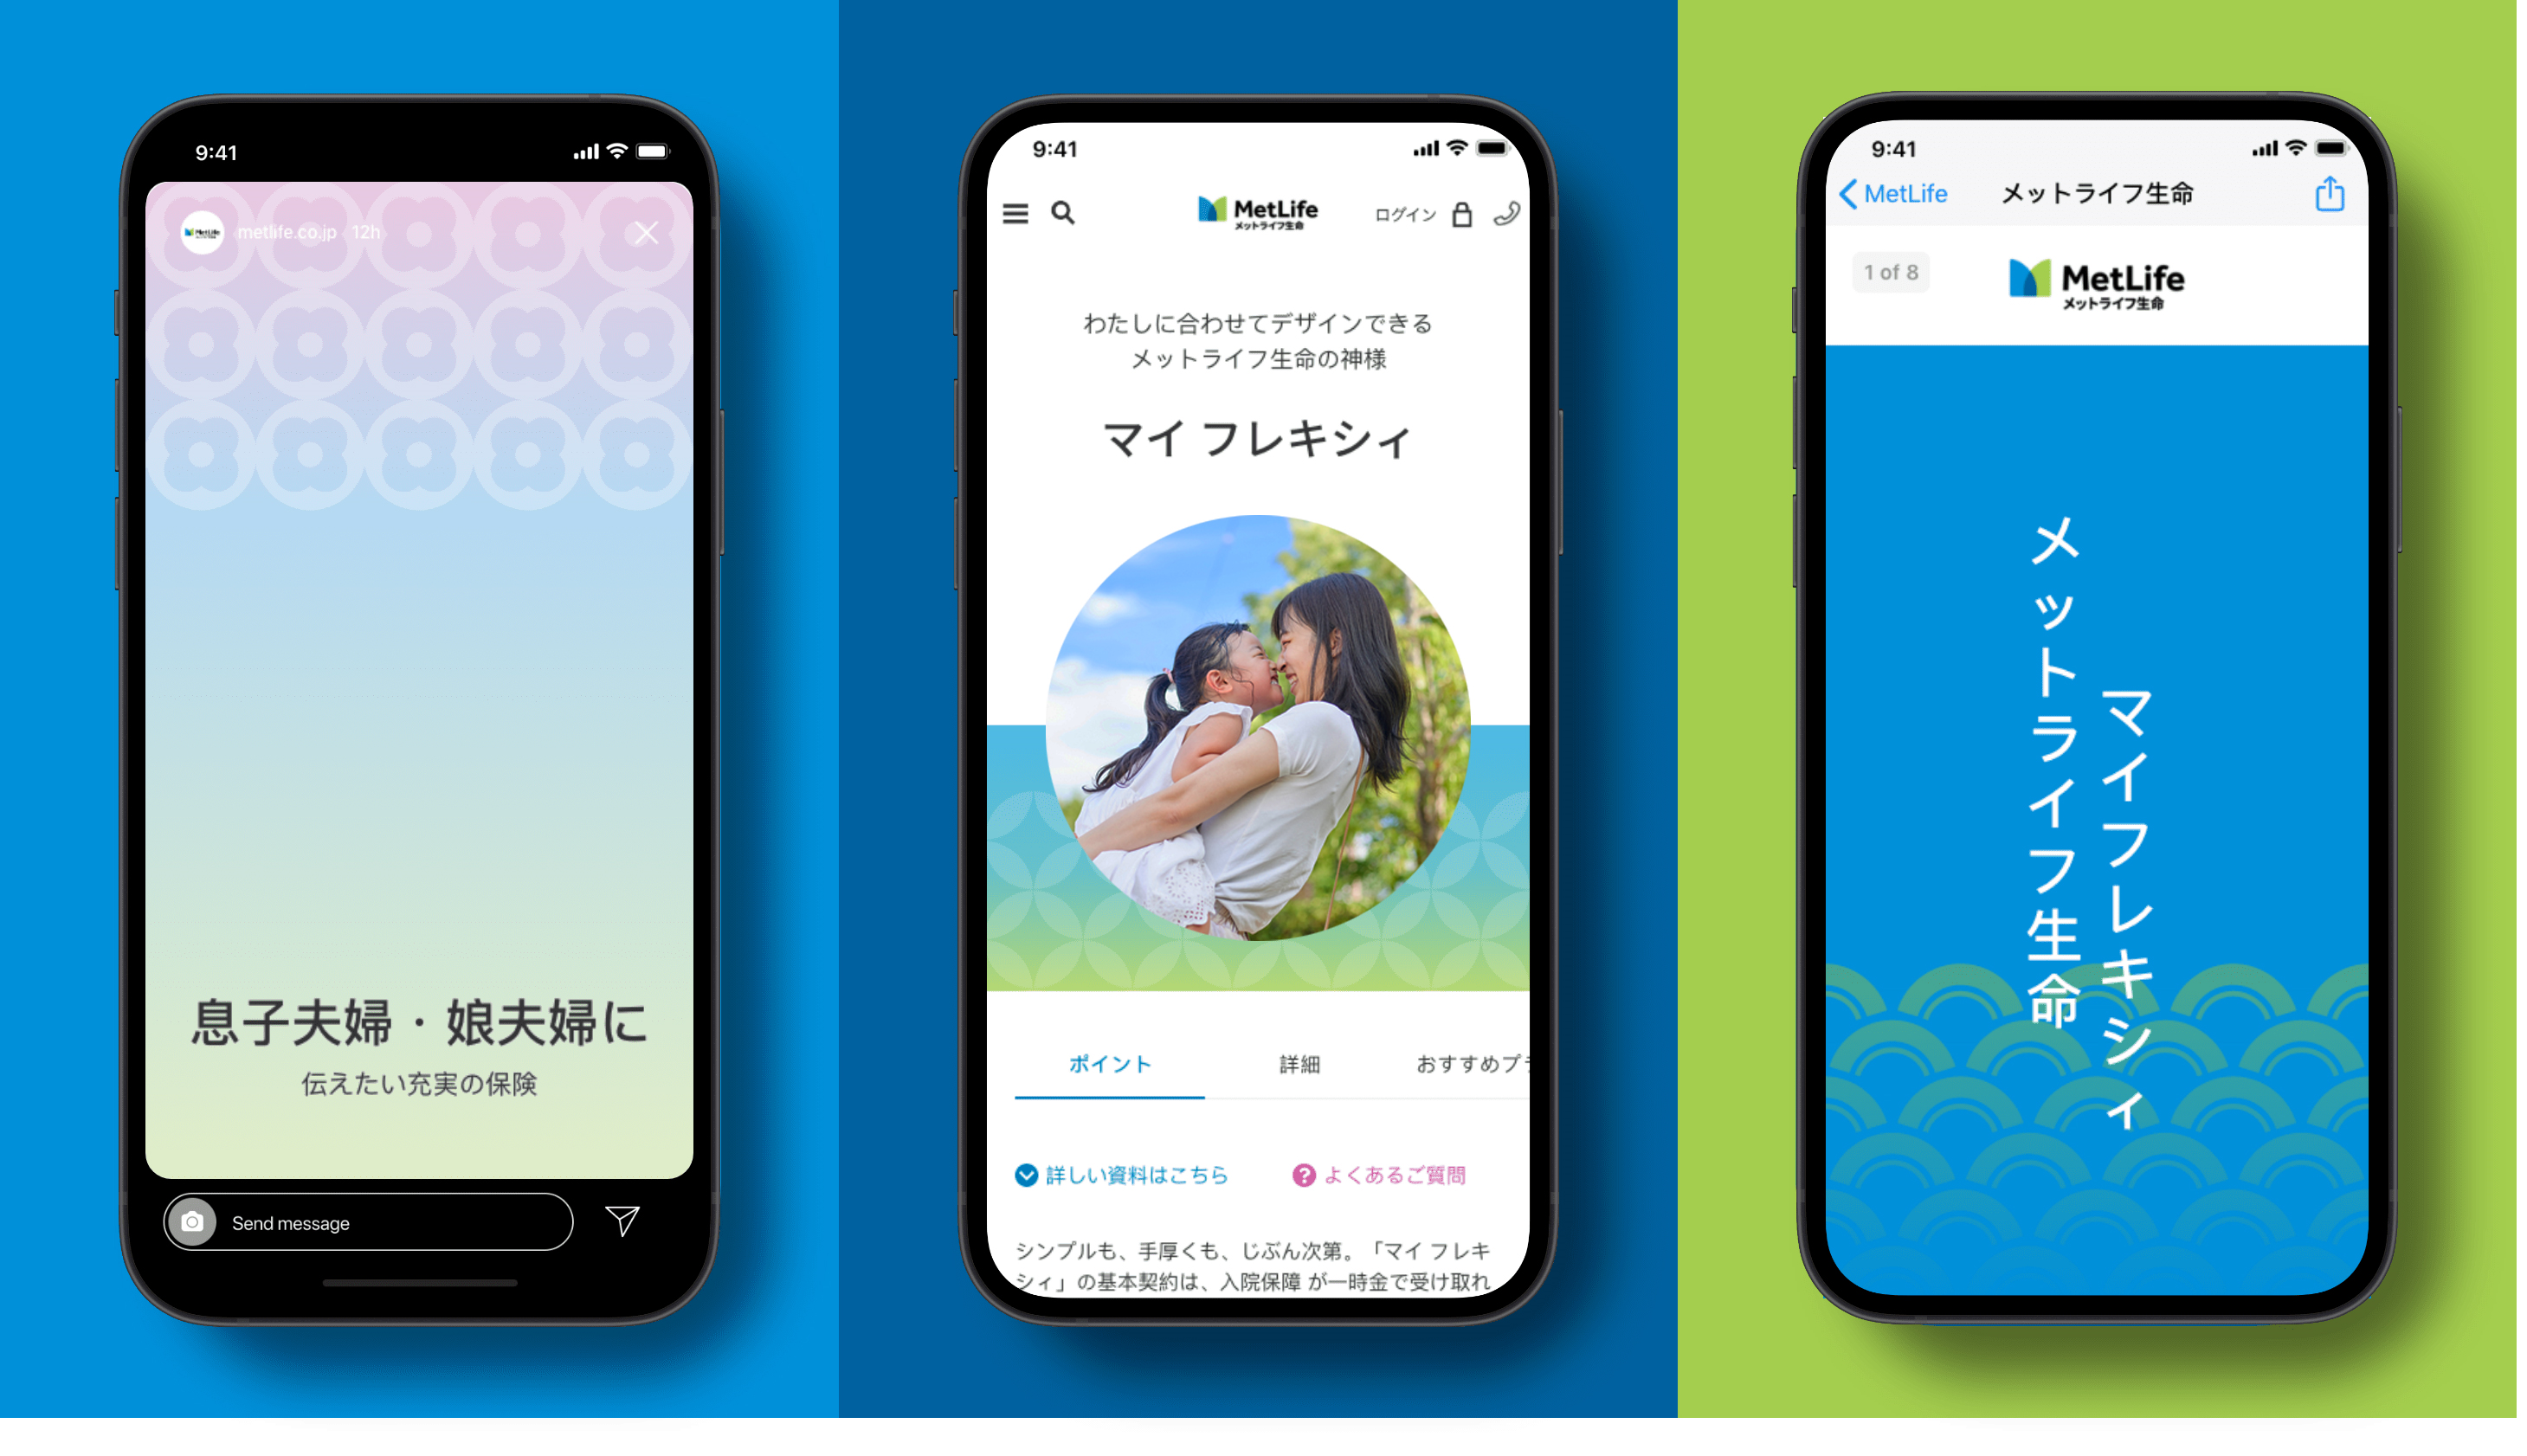 Three phone screens showing use of graphics digital designs from Japan.